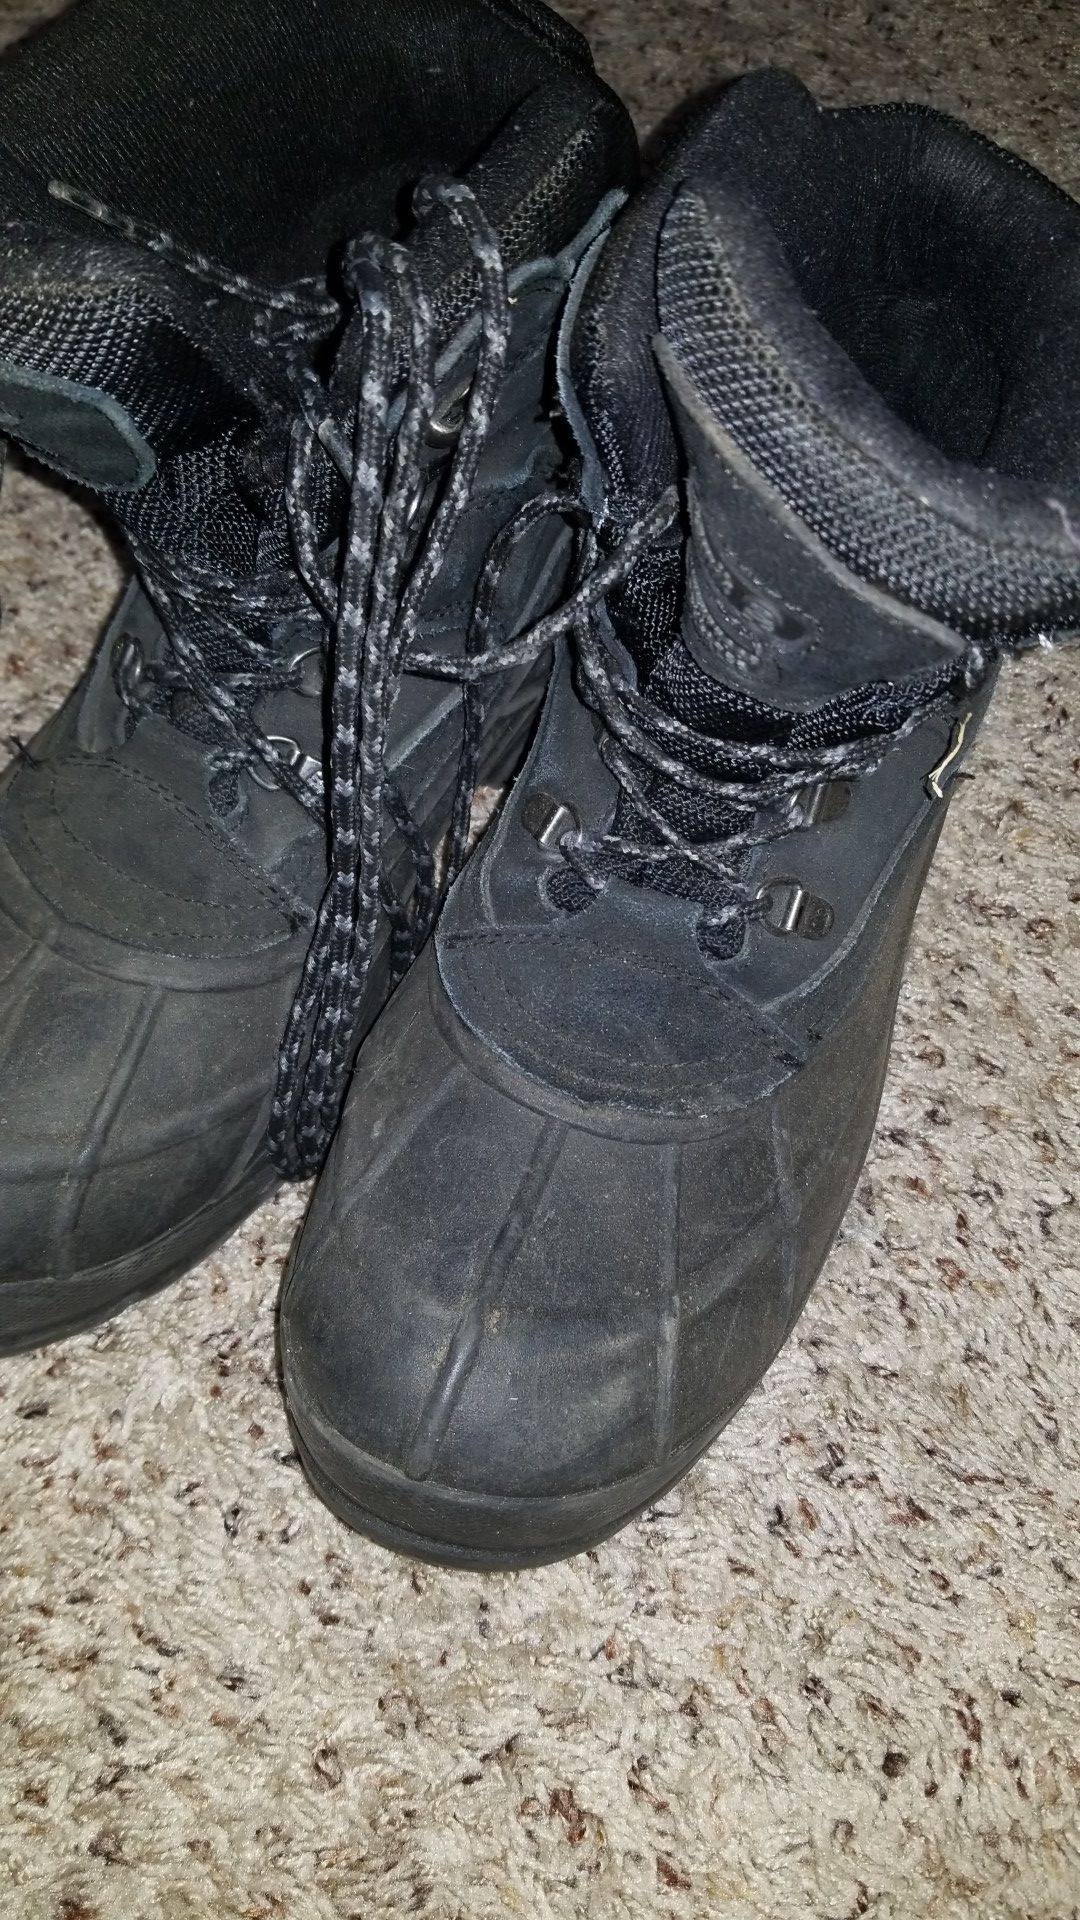 Men's Work Boots Thinsulate Size 10 Used Condition